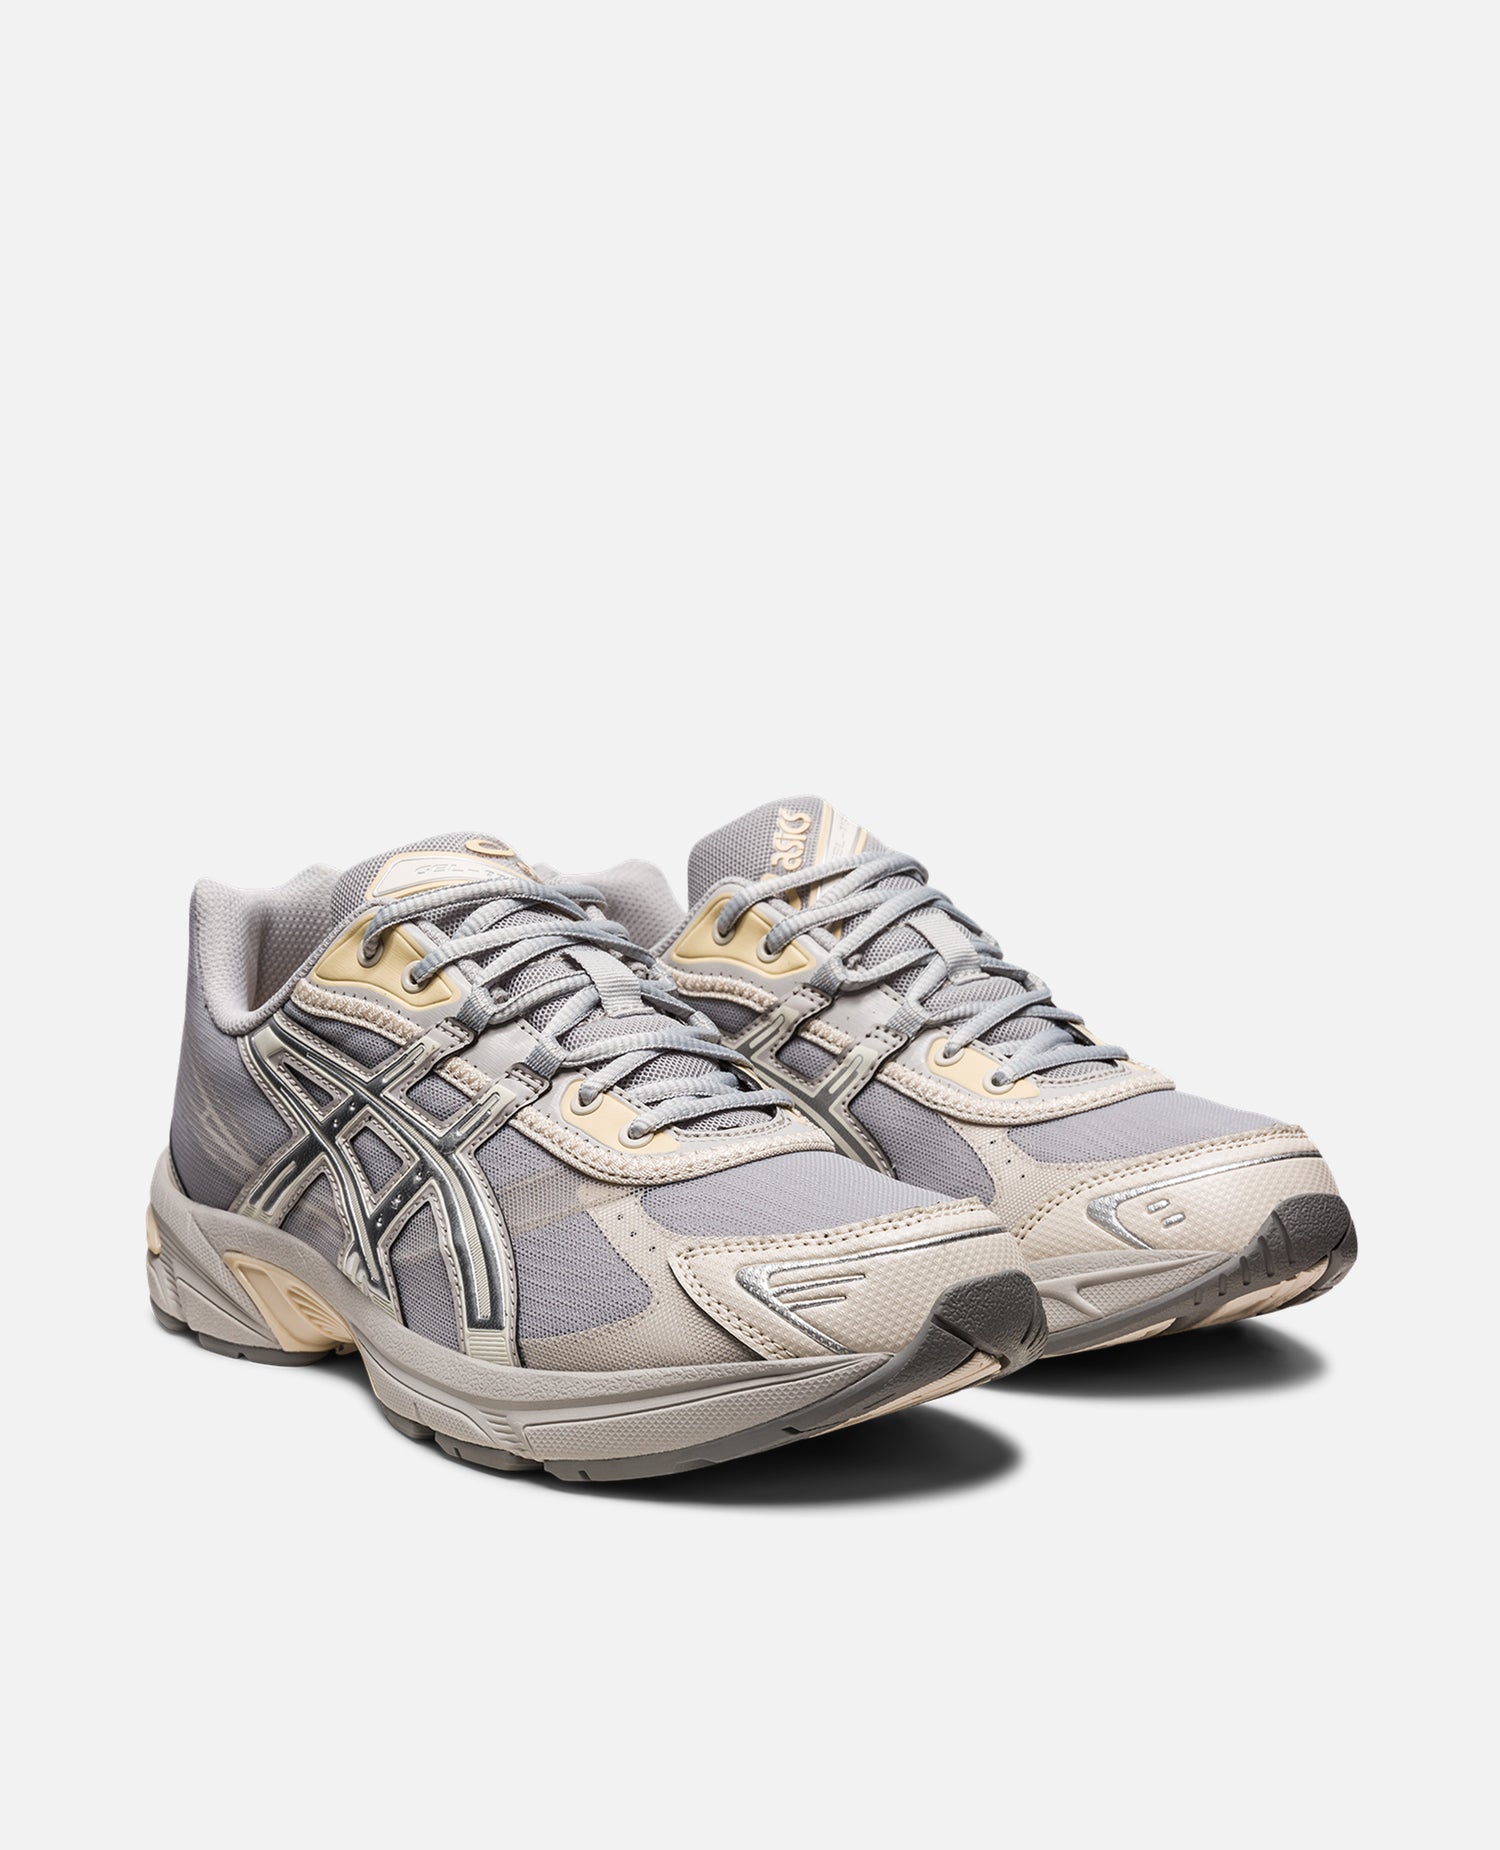 ASICS Gel-1130 RE (Oyster Grey/Pure Silver)